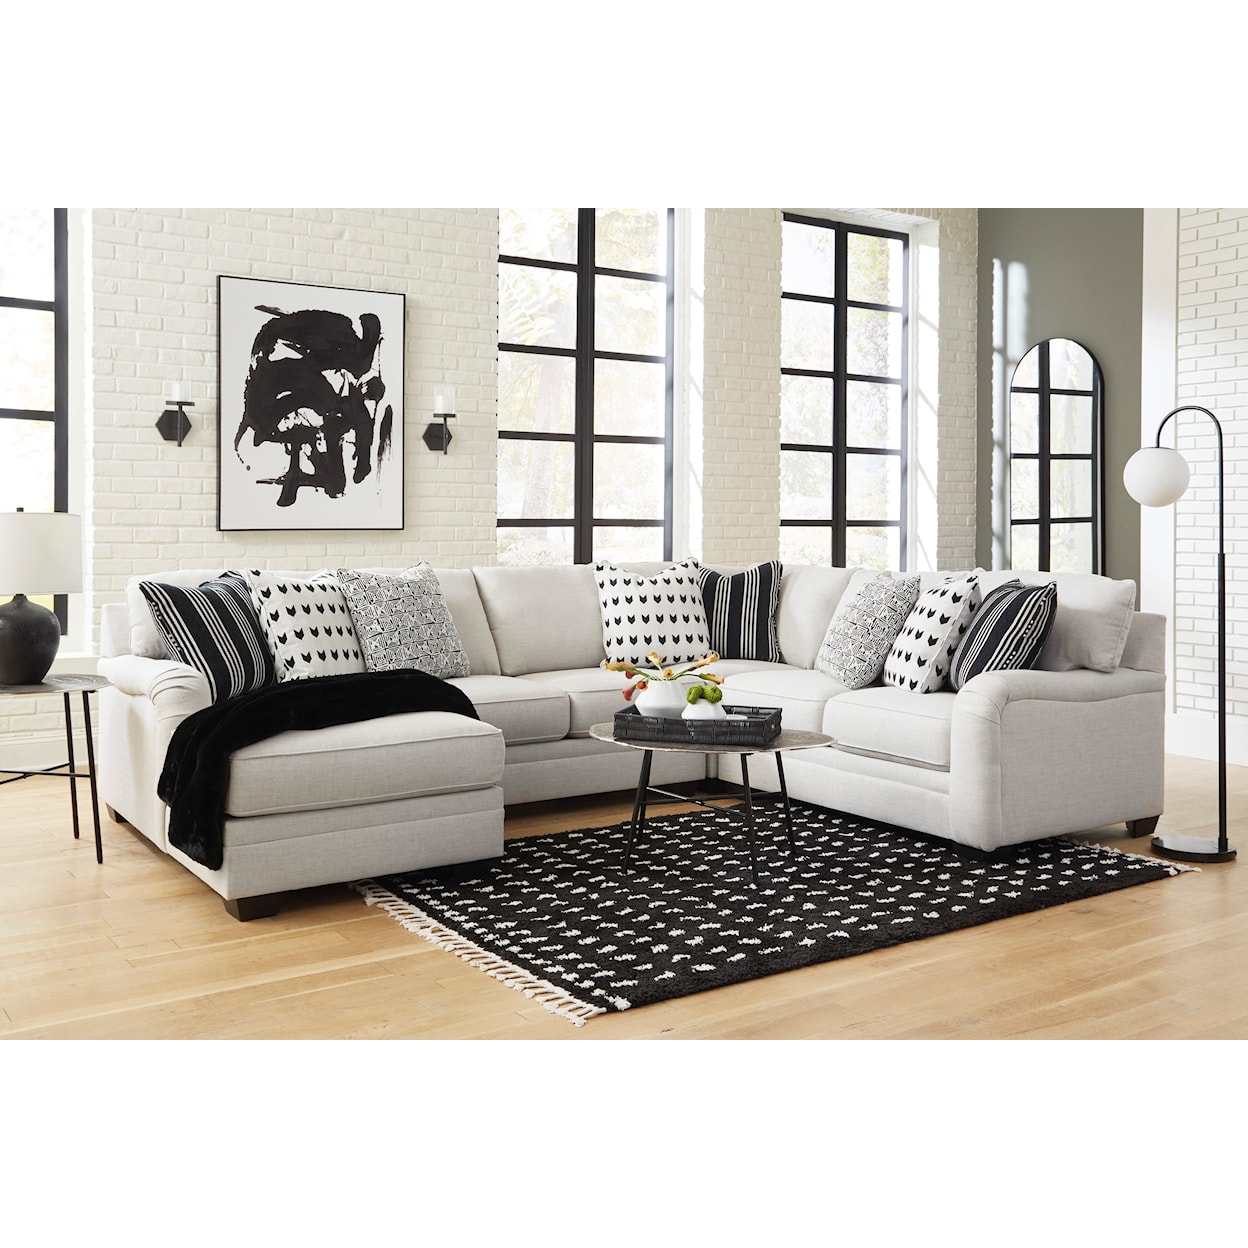 Ashley Furniture Signature Design Huntsworth 4-Piece Sectional with Chaise